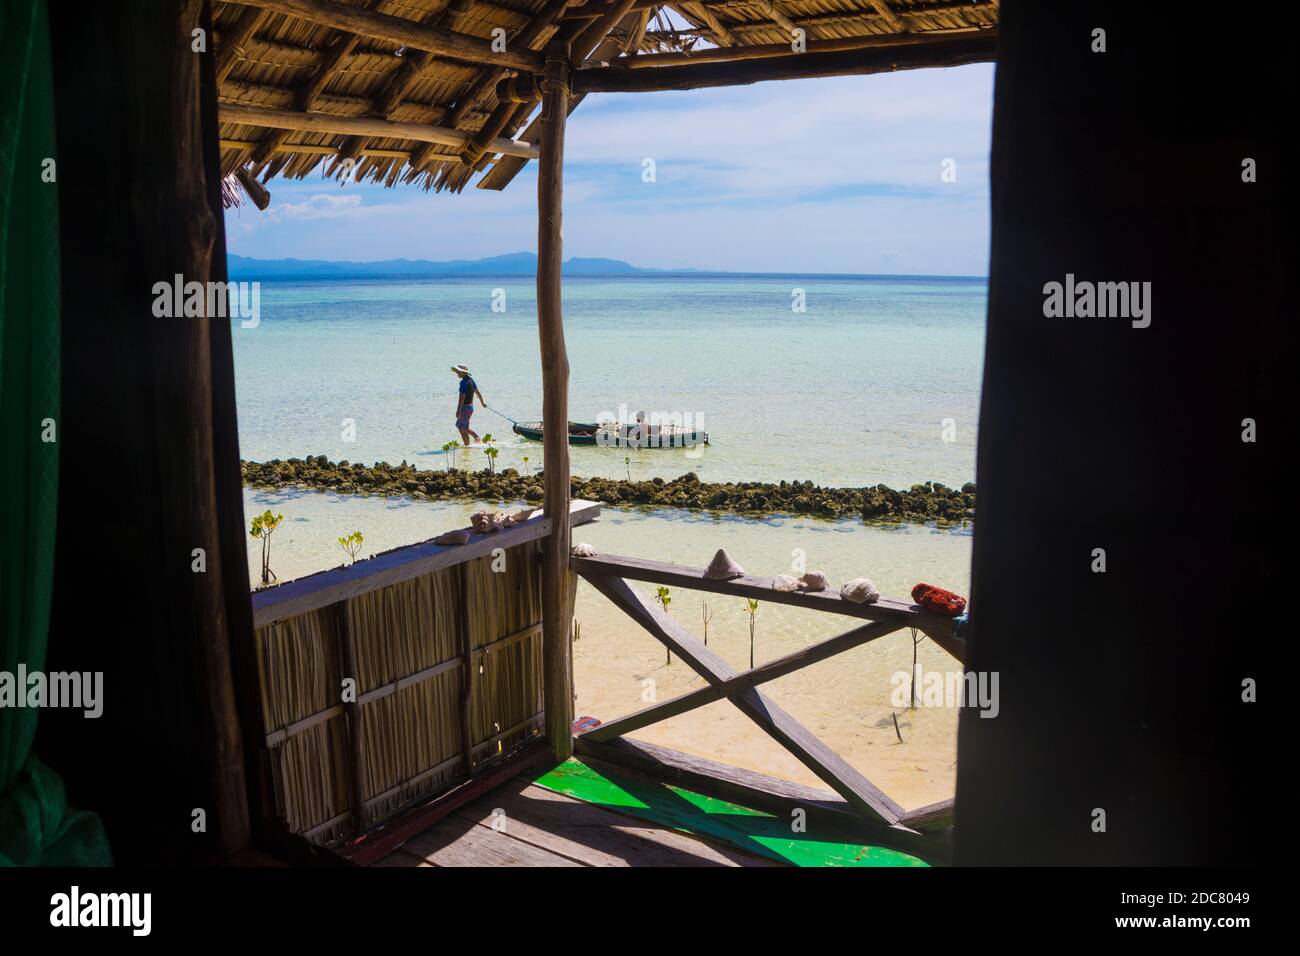 View from a wooden stilt house, Arborek, Raja Ampat, West Papua, Indonesia Stock Photo